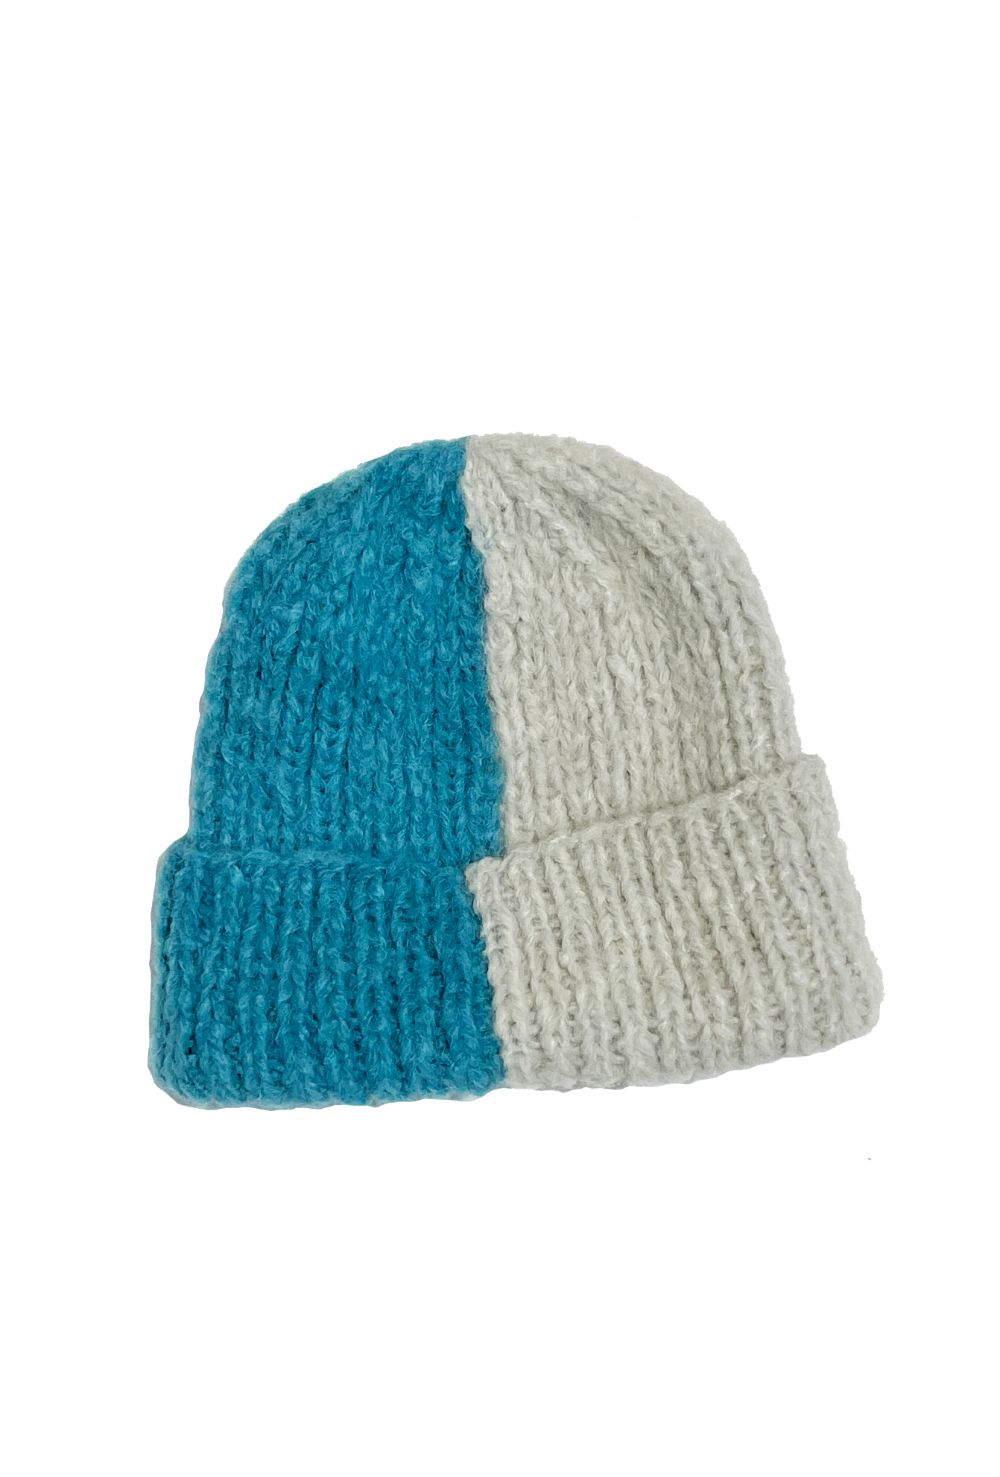 Checkity Alpaca hat in Turquoise Silver